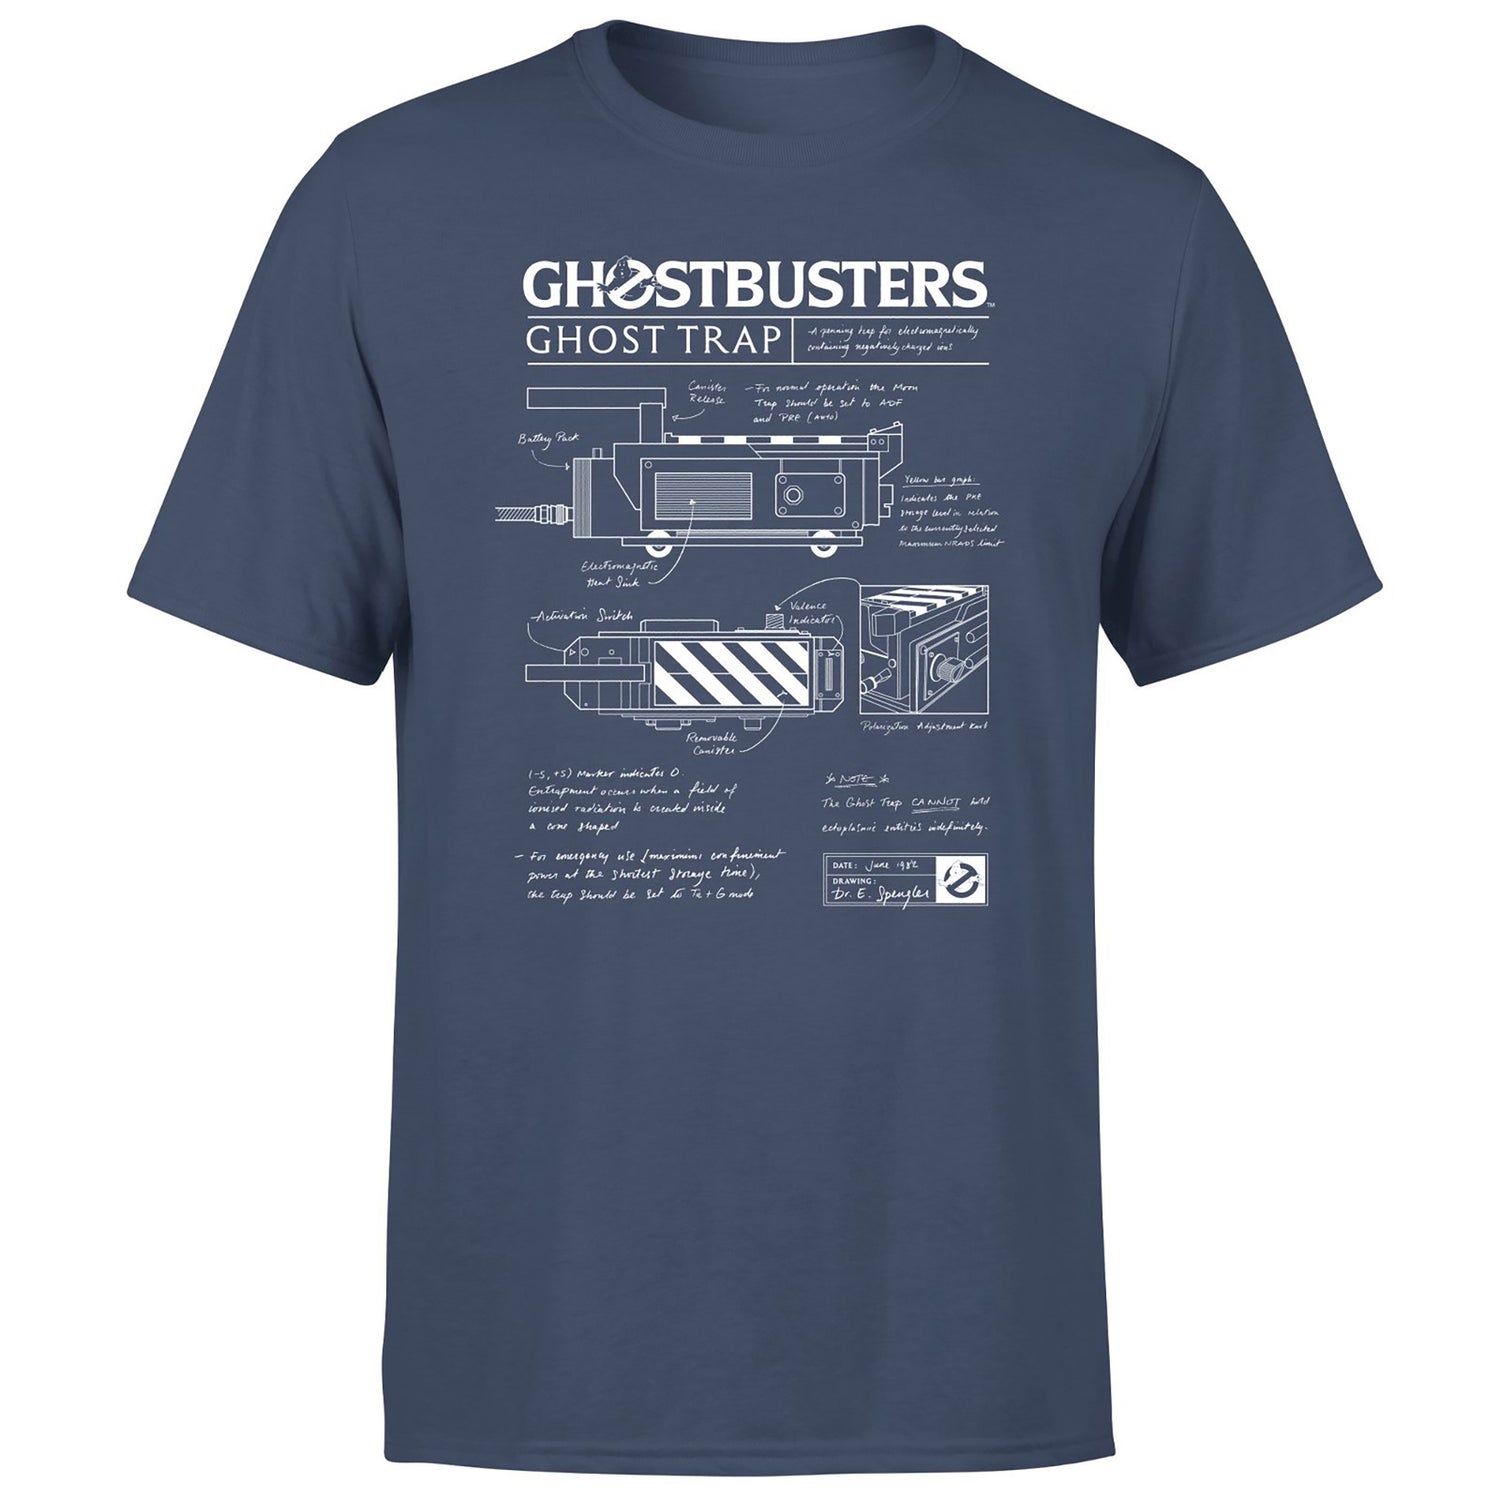 Ghostbusters Ghost Trap Schematic Men's T-Shirt - Navy